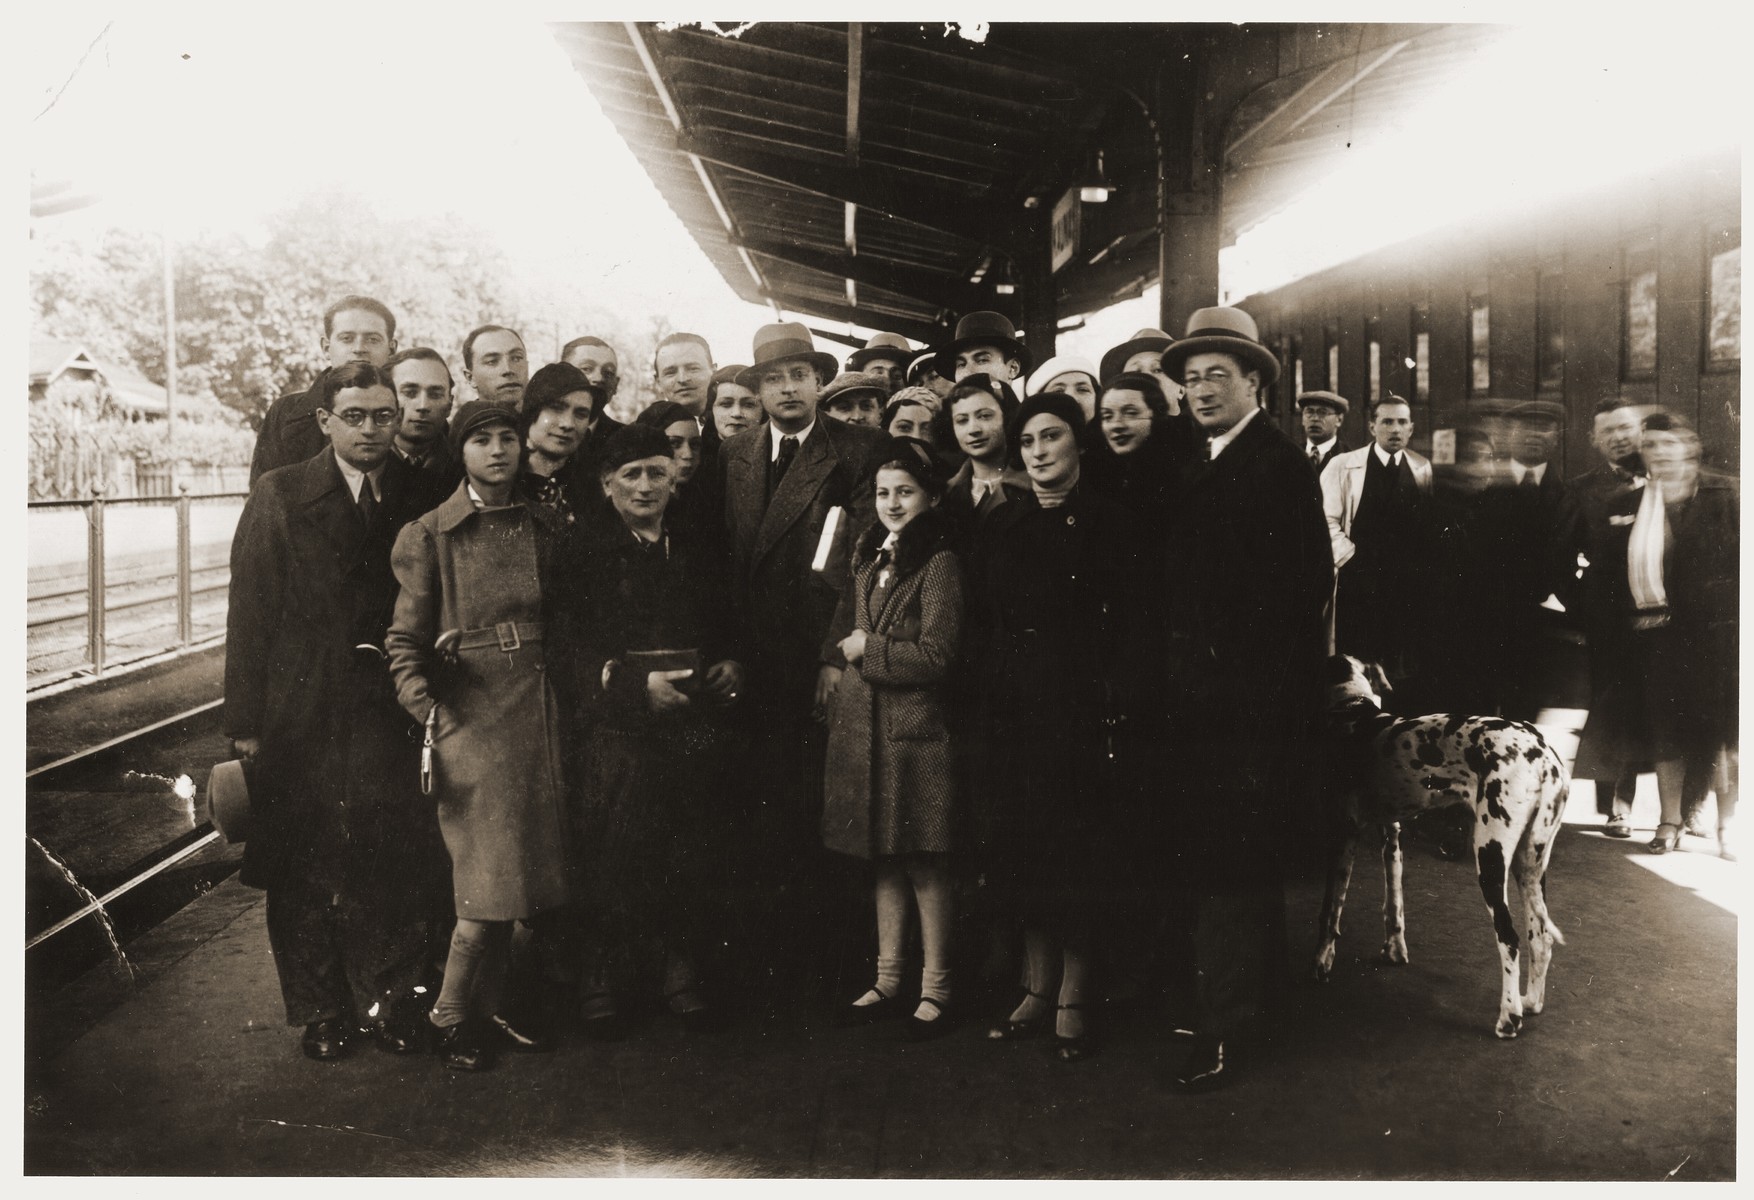 The Virovitch family gathers at the Kovno train station to bid farewell to Abrasha Virovitch who was immigrating to Palestine.

Abrasha was one of six children born to Malka Virovitch (pictured third from the left).  His brothers were Salamon, Liova, Isaak and his sisters were Rebecca Giniene and Bertha Jurovitzki.  The entire Virovitch family including Rebecca's two daughters Sara and Alice gathered to wish Abrasha well.  In Palestine, Abrasha married Fania, and the two returned to Kovno in 1939 to pay the family a visit.  Once the war started, he was unable to return to Palestine.  He and his brothers, Salamon and Isaak, were murdered three days after the German invasion of Lithuania, June 23, 1941, when Lithuanian partisans entered the family's apartment, dragged out the men and shot them in the back yard.  Abrasha's young wife, Fania, was killed during the liquidation of the Kovno ghetto, but their daughter, Tania, born in 1941 survived in hiding.